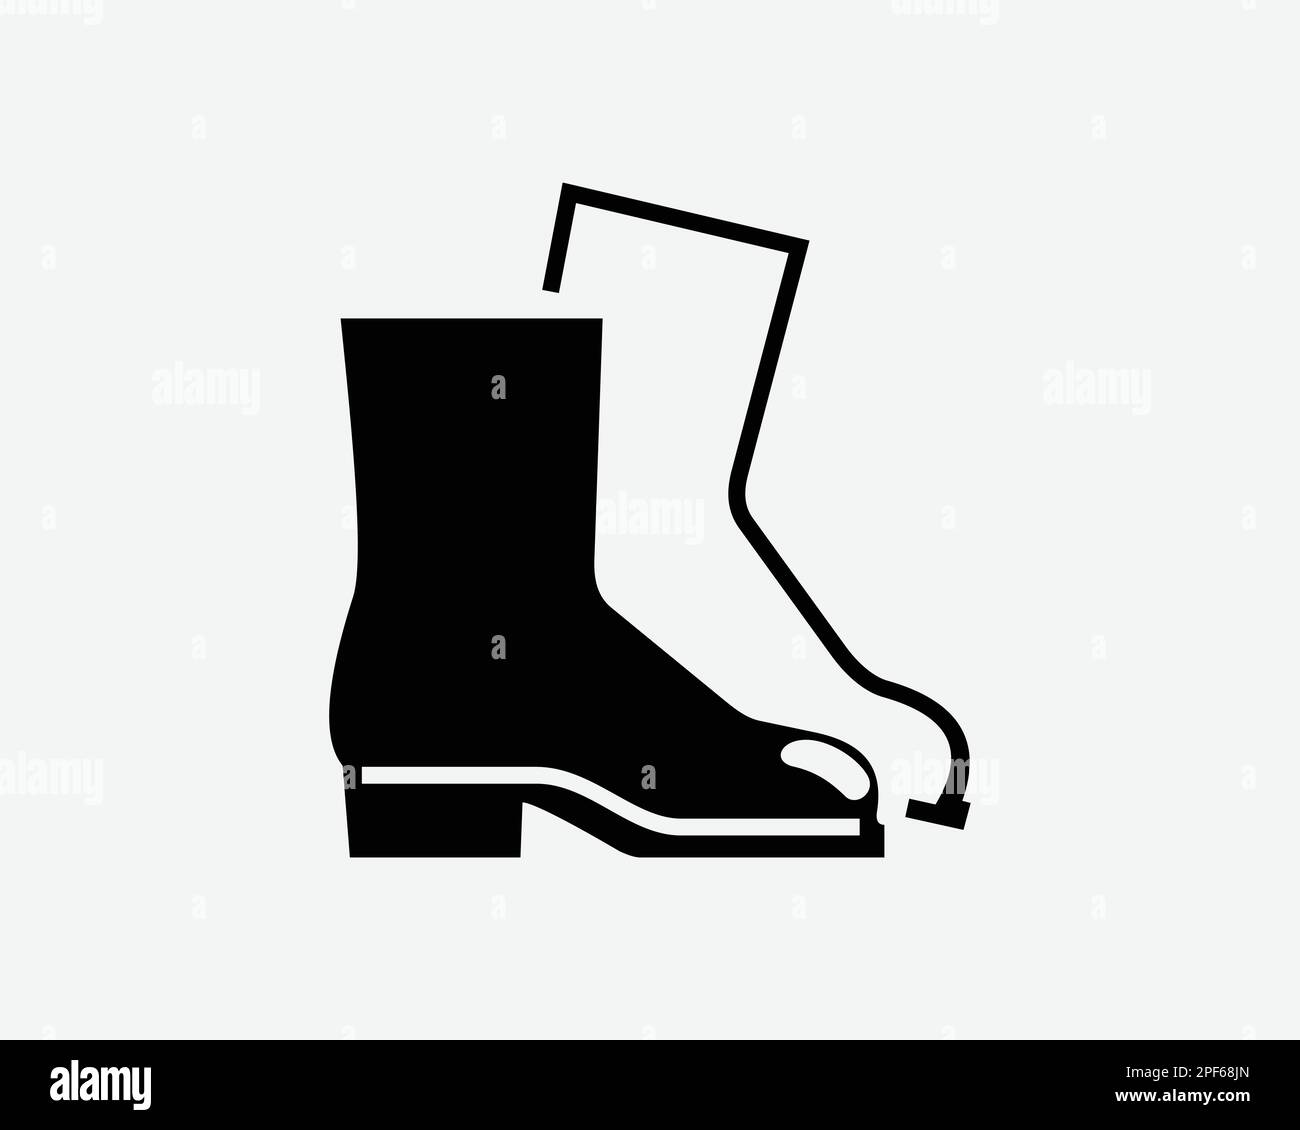 Protective High Rubber Boots Footwear Shoes Gumboots Black White Silhouette Sign Symbol Icon Clipart Graphic Artwork Pictogram Illustration Vector Stock Vector